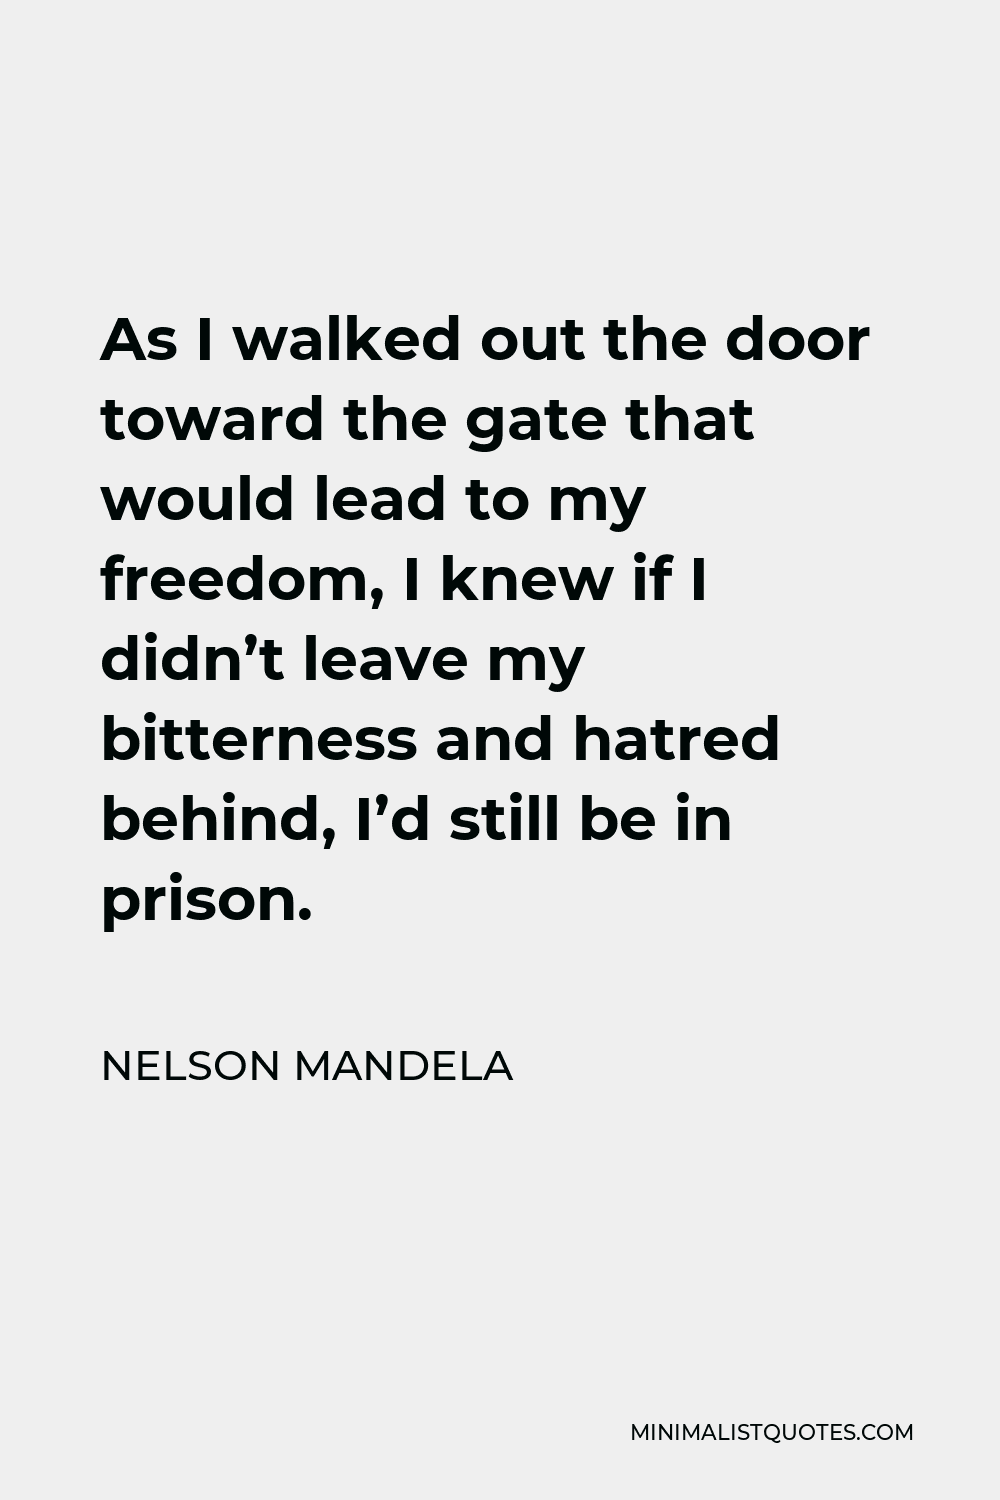 Nelson Mandela Quote - As I walked out the door toward the gate that would lead to my freedom, I knew if I didn’t leave my bitterness and hatred behind, I’d still be in prison.